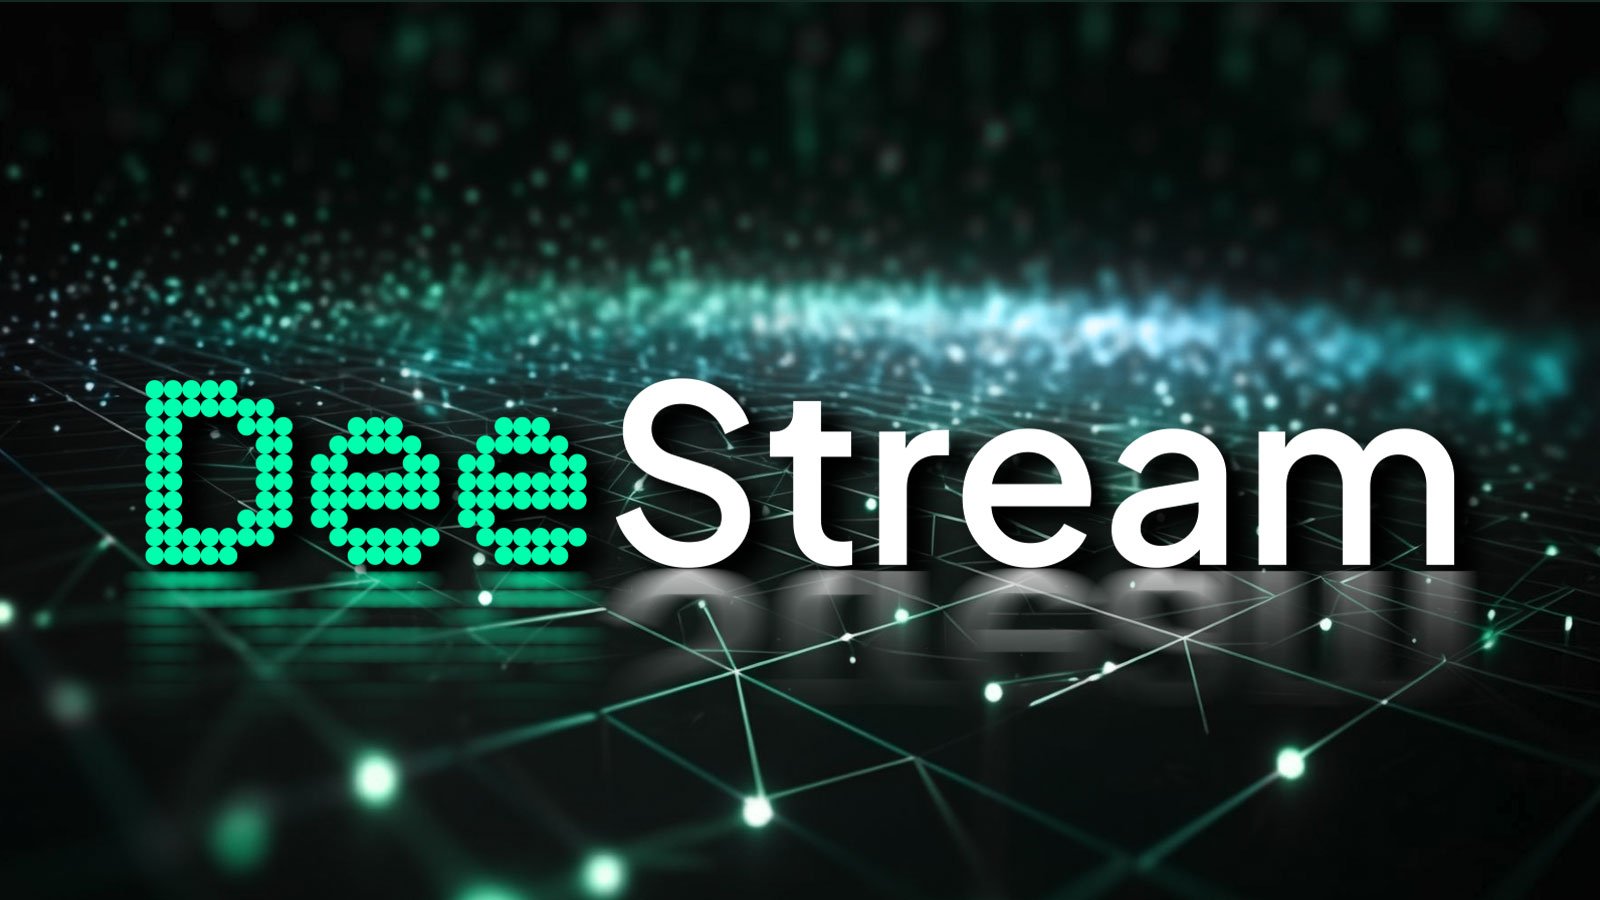 DeeStream (DST) Crypto Coin Sale Campaign Might be in Spotlight since Shiba Inu (SHIB), Polkadot (DOT) Supporters Waiting for Upgrades